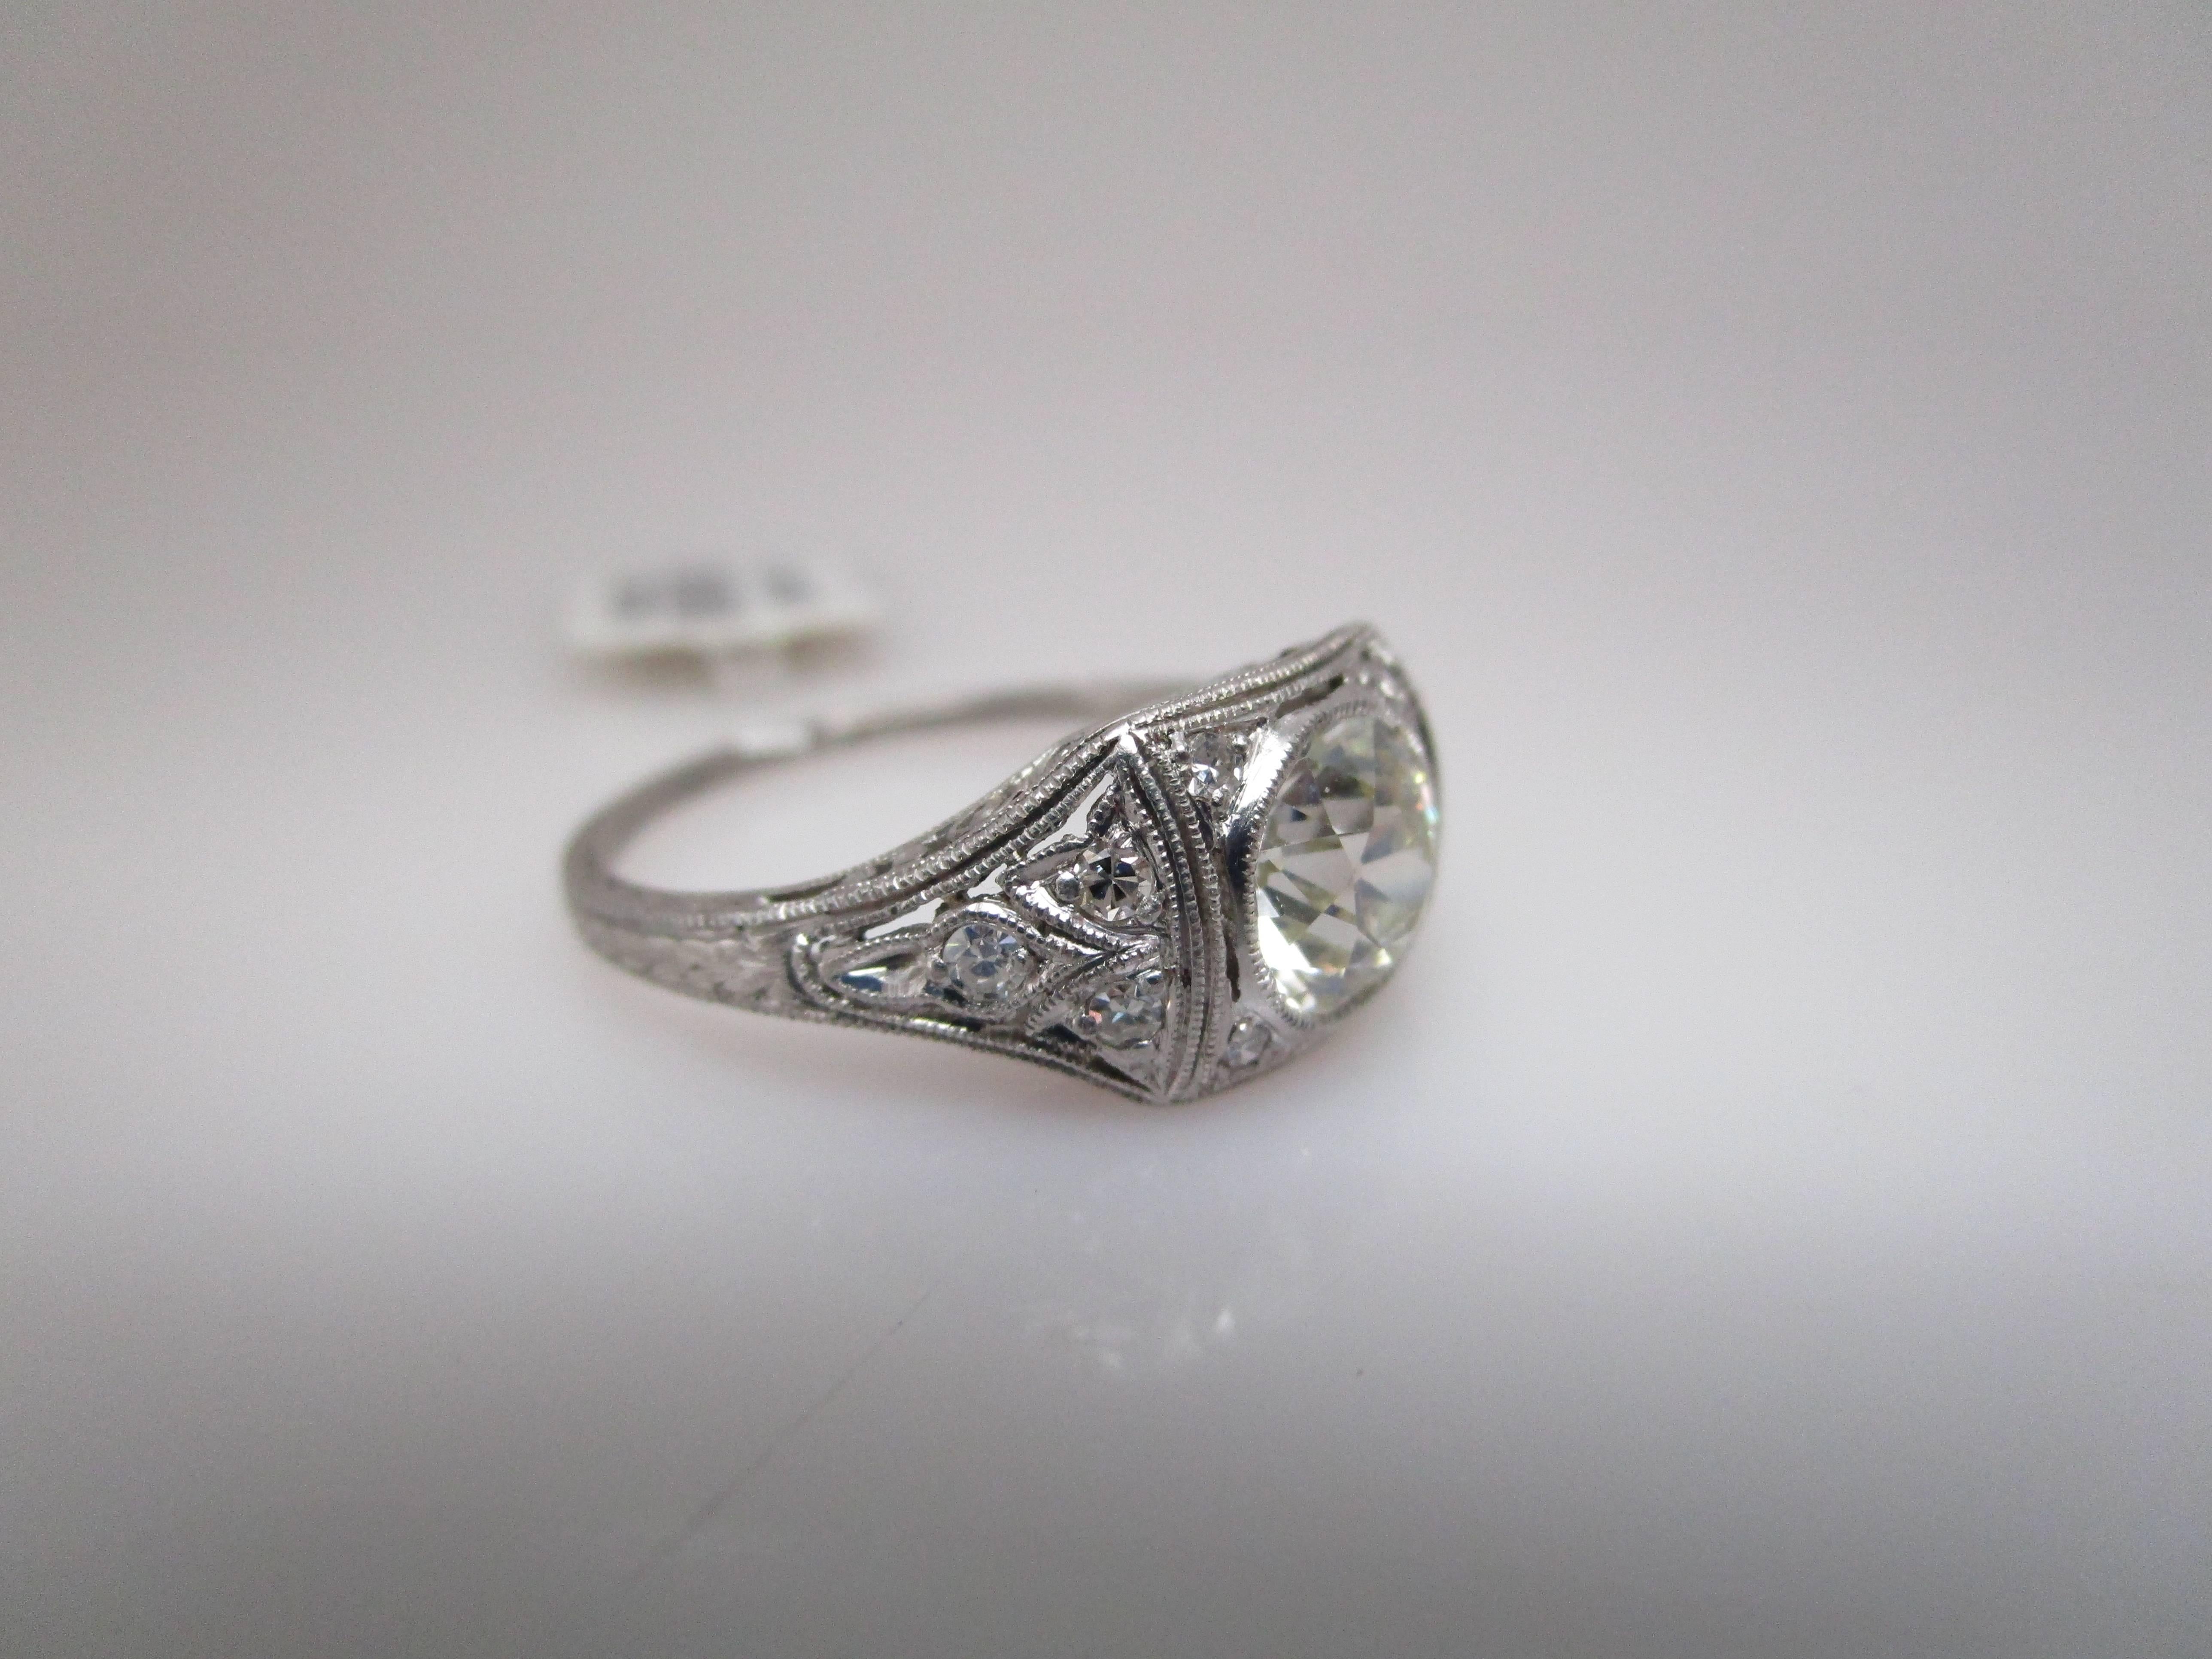 Diamond: 1.07ct K VS Old Euro Cut round with GIA report
Set in c. 1910-1915 Platinum Edwardian ring with approximately 0.14 carats total of melee diamonds.
Lovely milgrain bezel around center diamond. Easy to wear as the ring sits low to